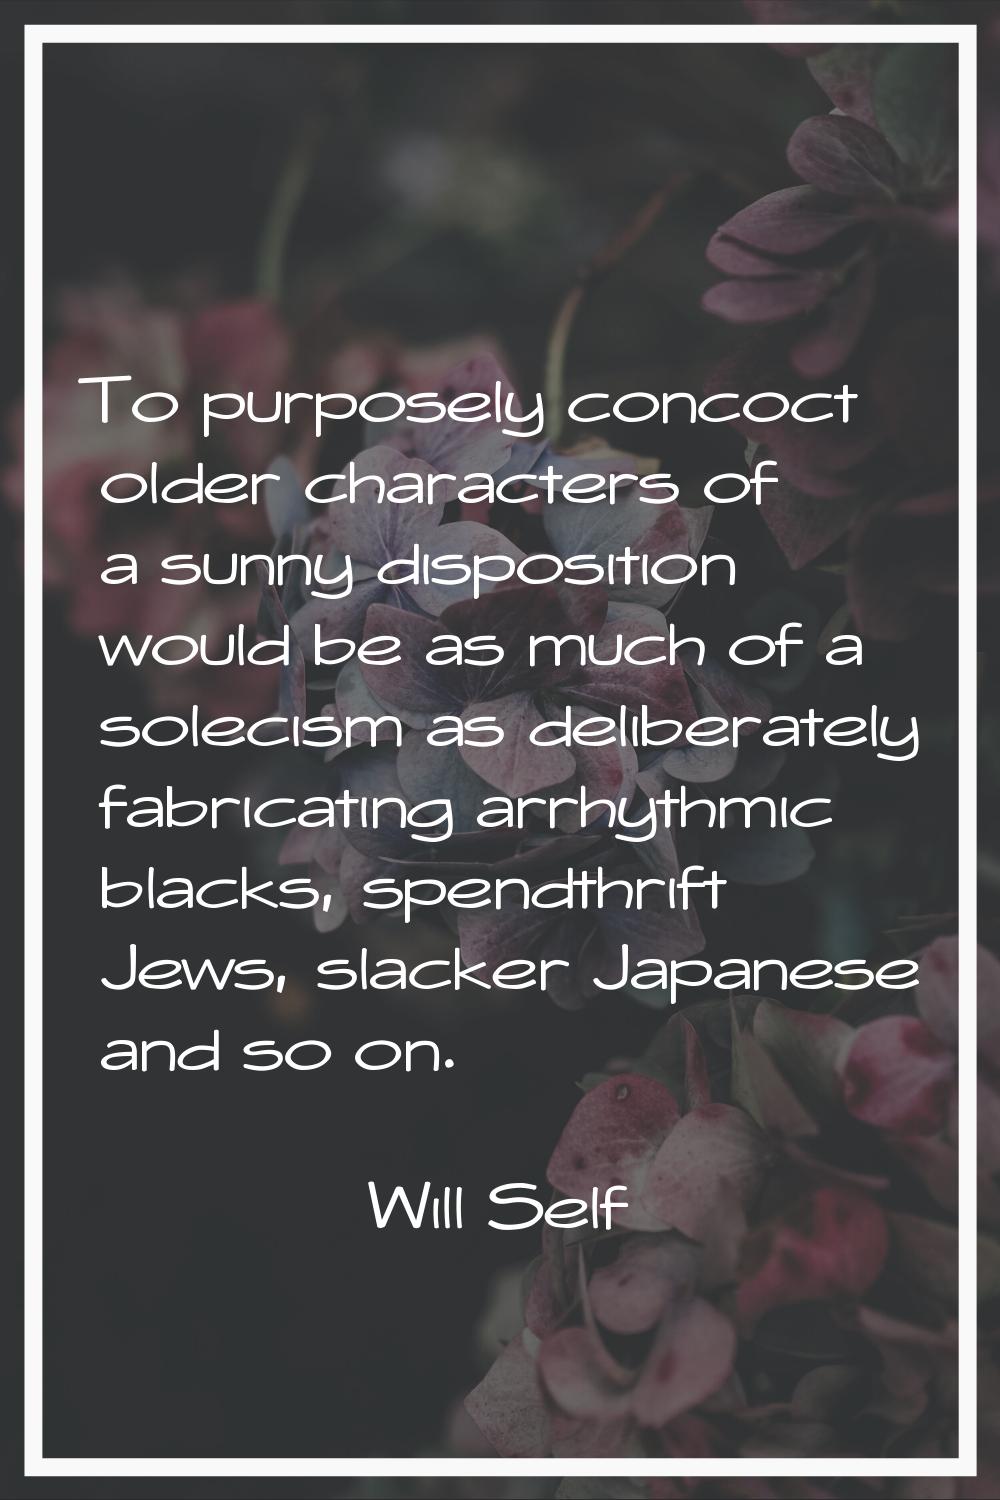 To purposely concoct older characters of a sunny disposition would be as much of a solecism as deli